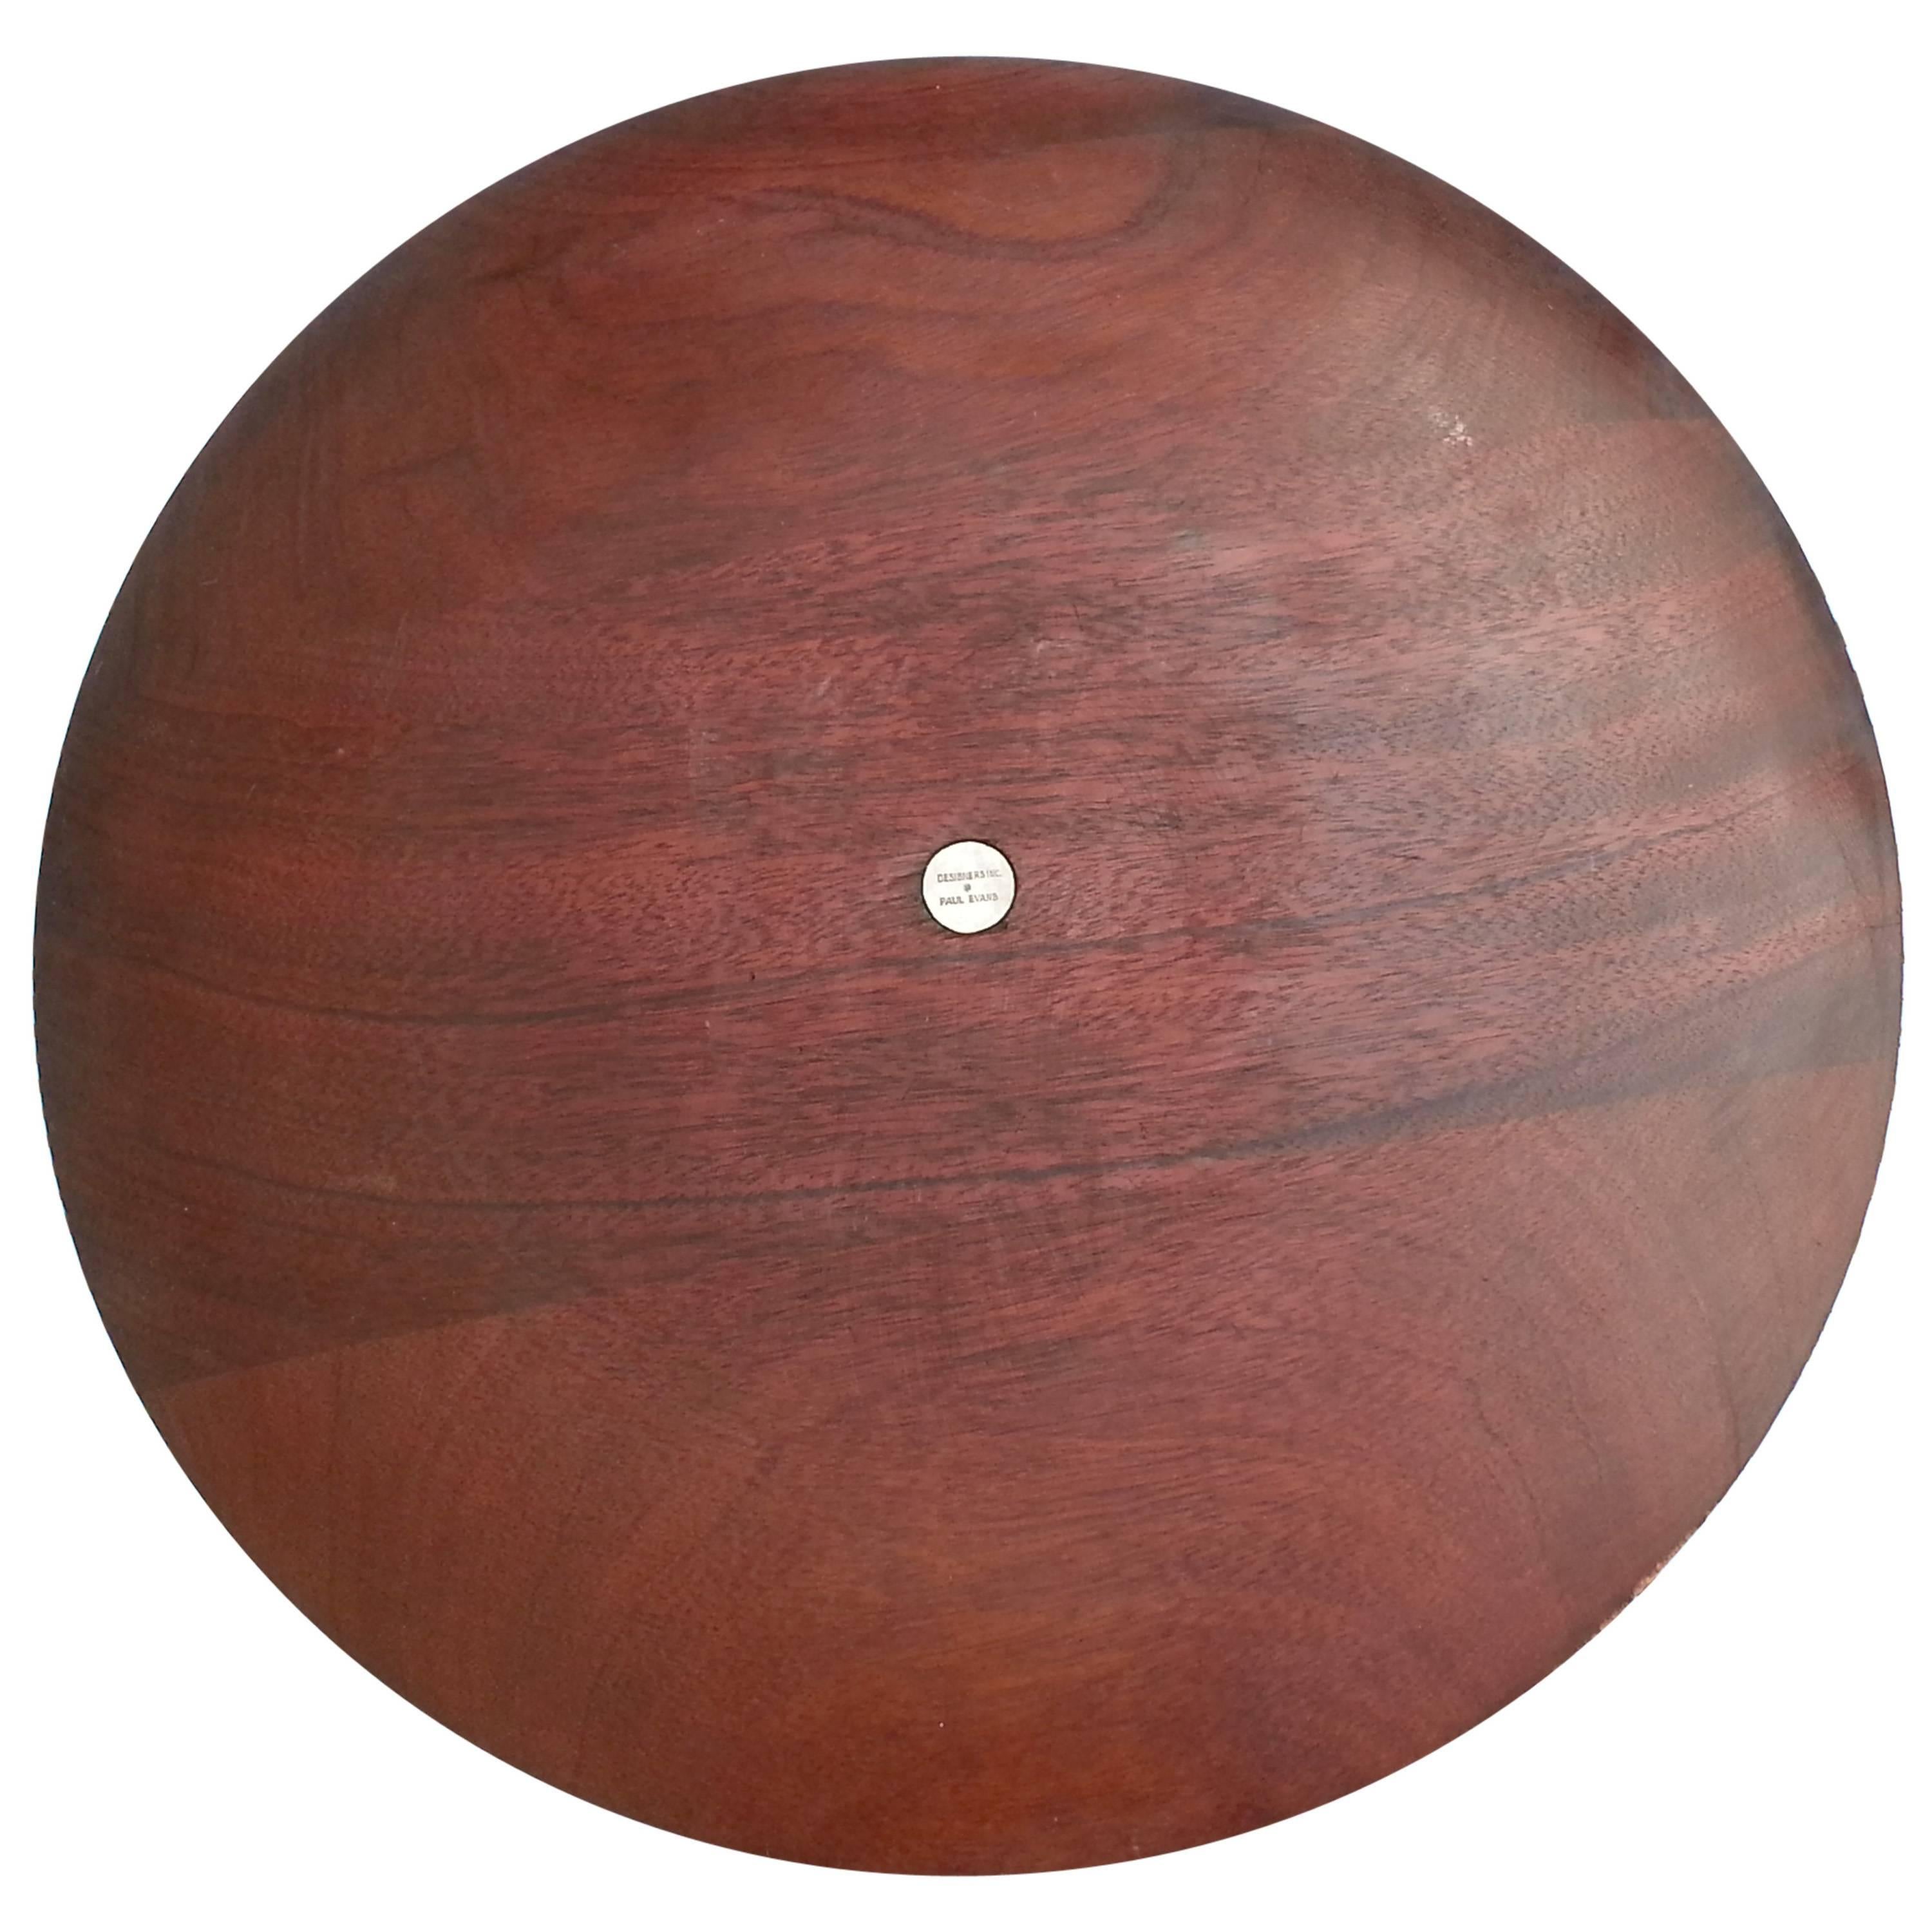 Stunning walnut and pewter large charger plate by Paul Evans and Phillip Lloyd Powell having a starburst pattern on the front, gorgeous workmanship and richly grained wood.
 